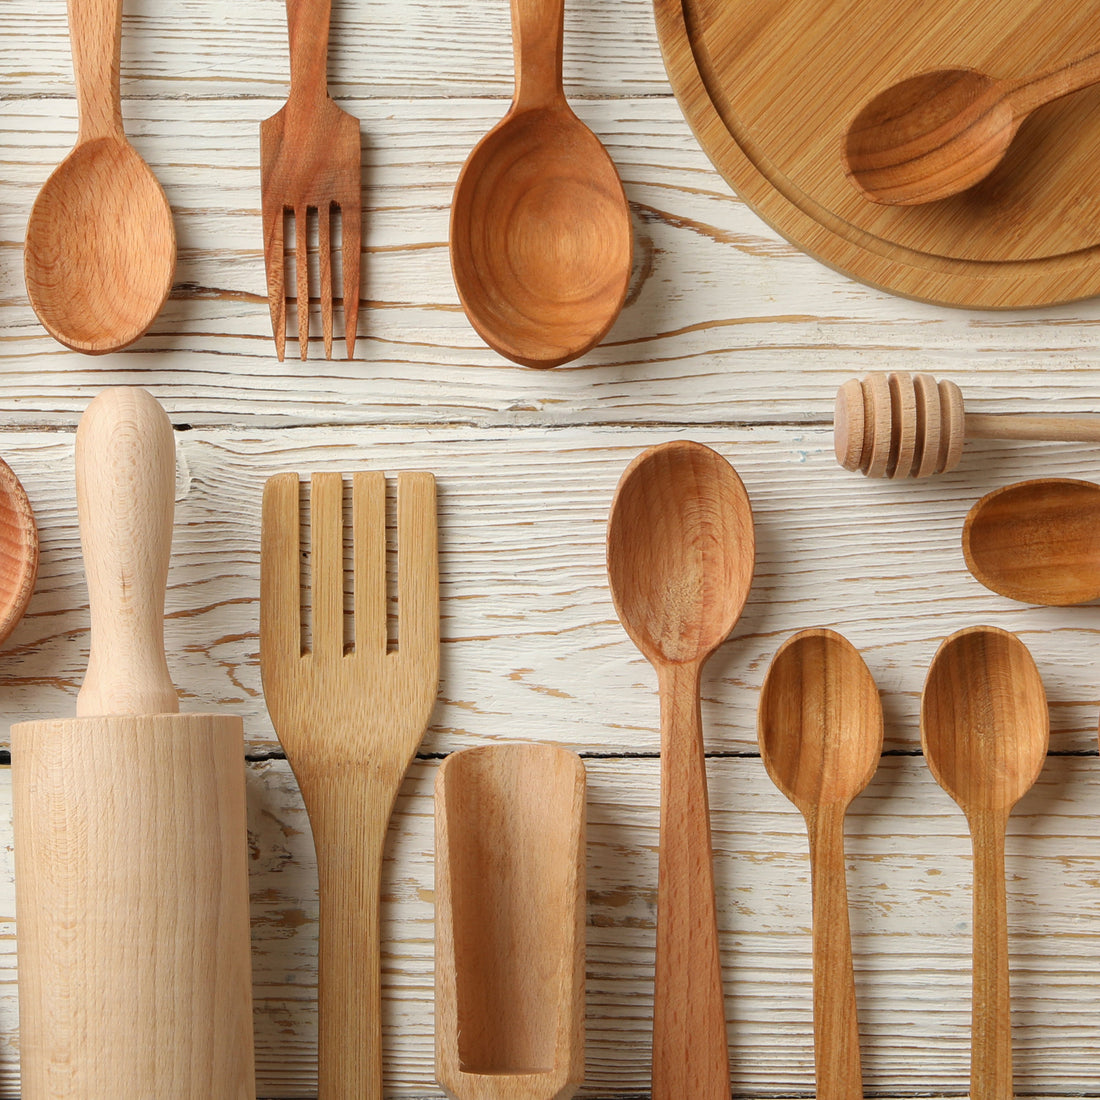 7 Benefits of Wooden Spoons To Make Them Special